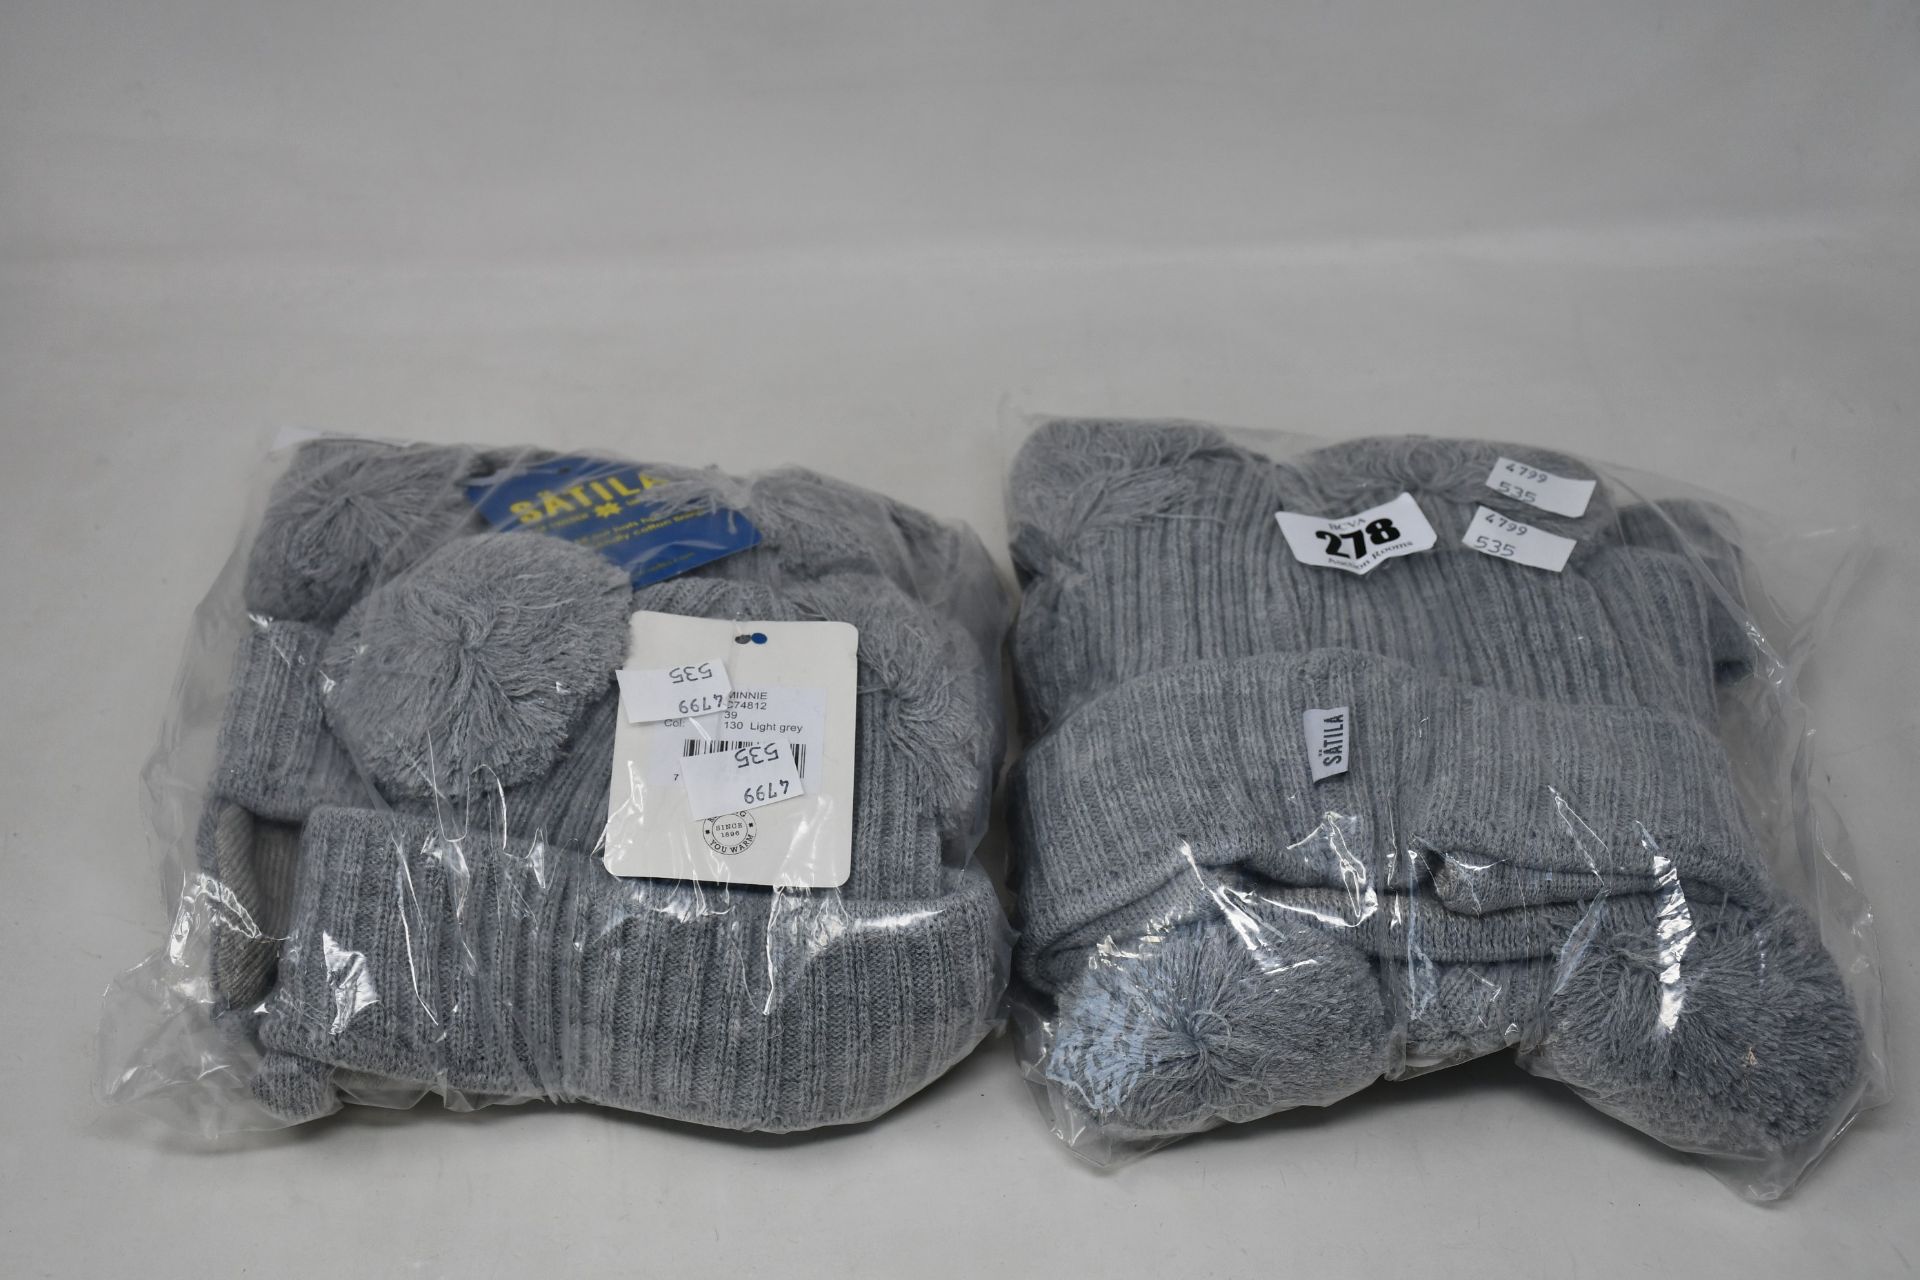 Six children's as new Satila Minnie hats in light grey (Sizes 39 and 45).